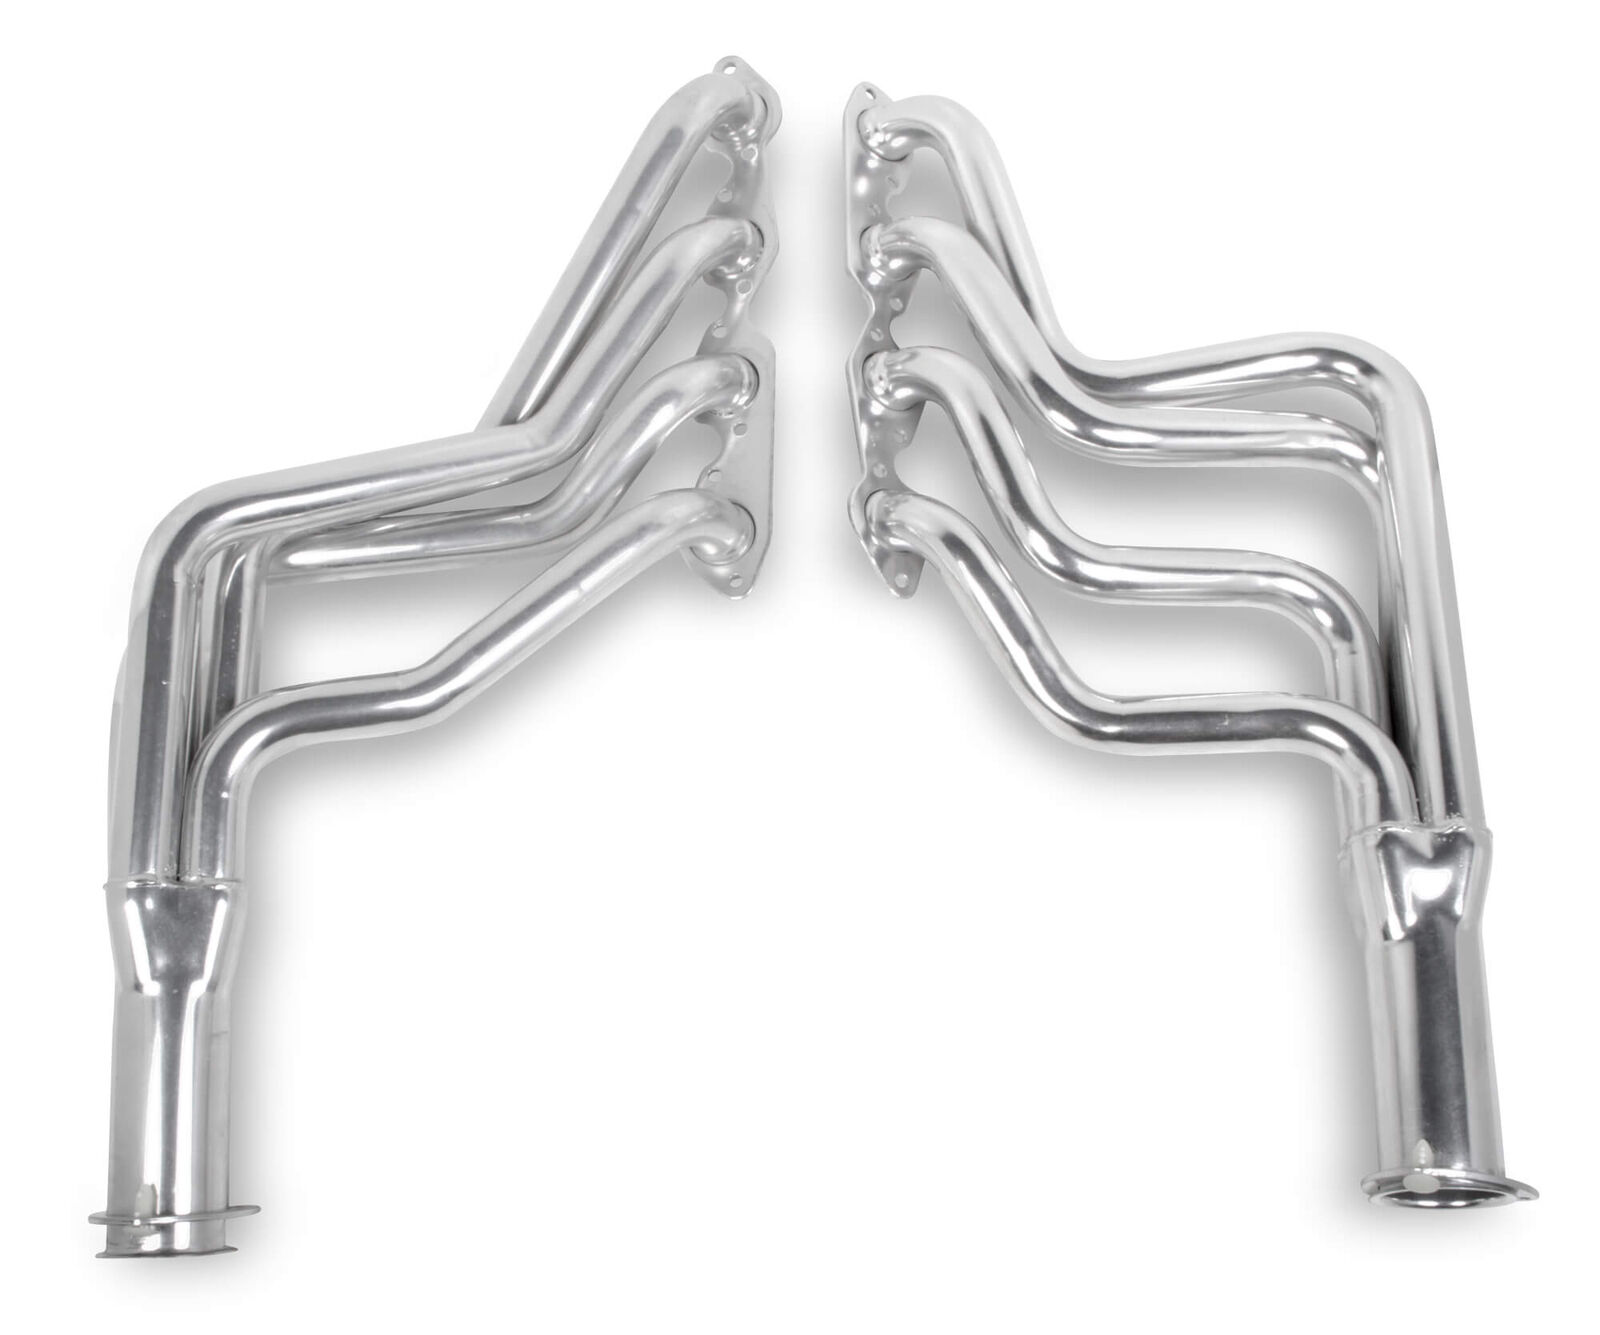 Flowtech Mild Steel Silver Ceramic Long Tube Exhaust for Chevy Bel Air 71-74